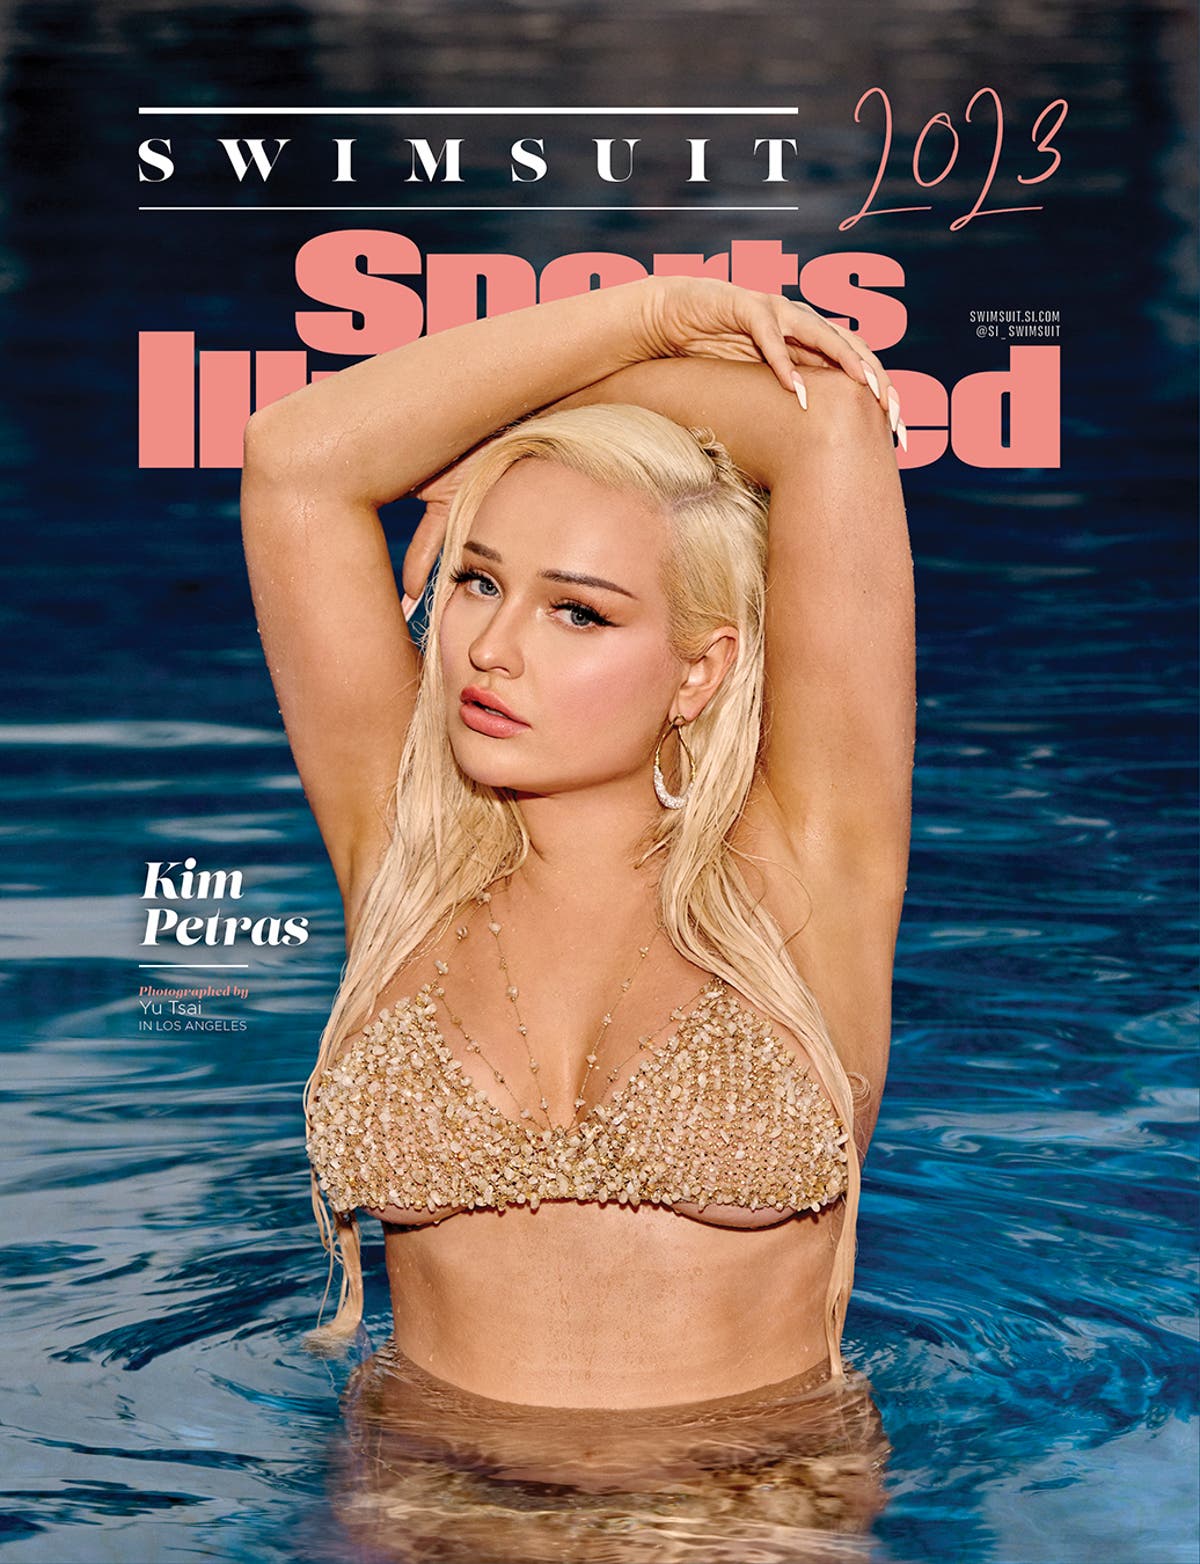 Kim Petras shares glee at second transgender cover star of